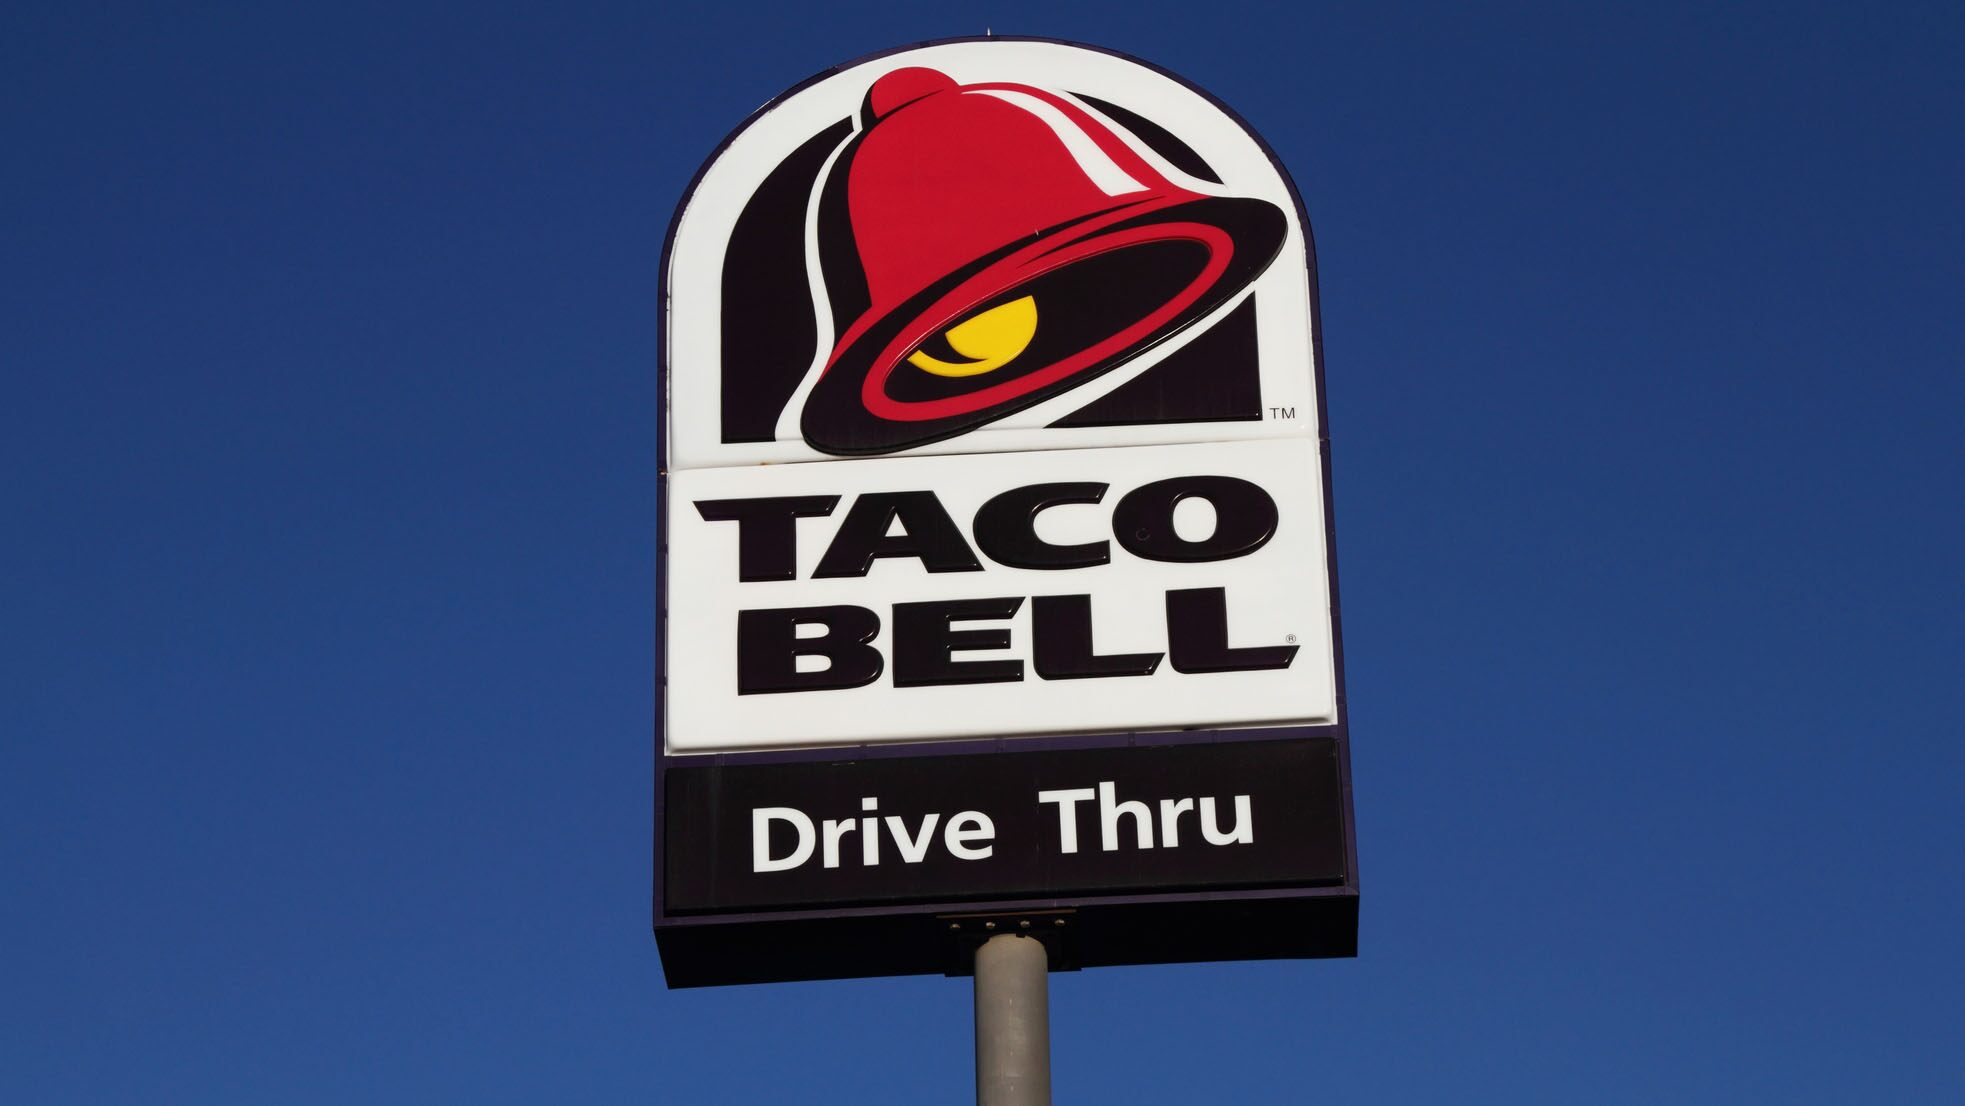 Taco Bell: Quesarito to live on, despite rumors to the contrary